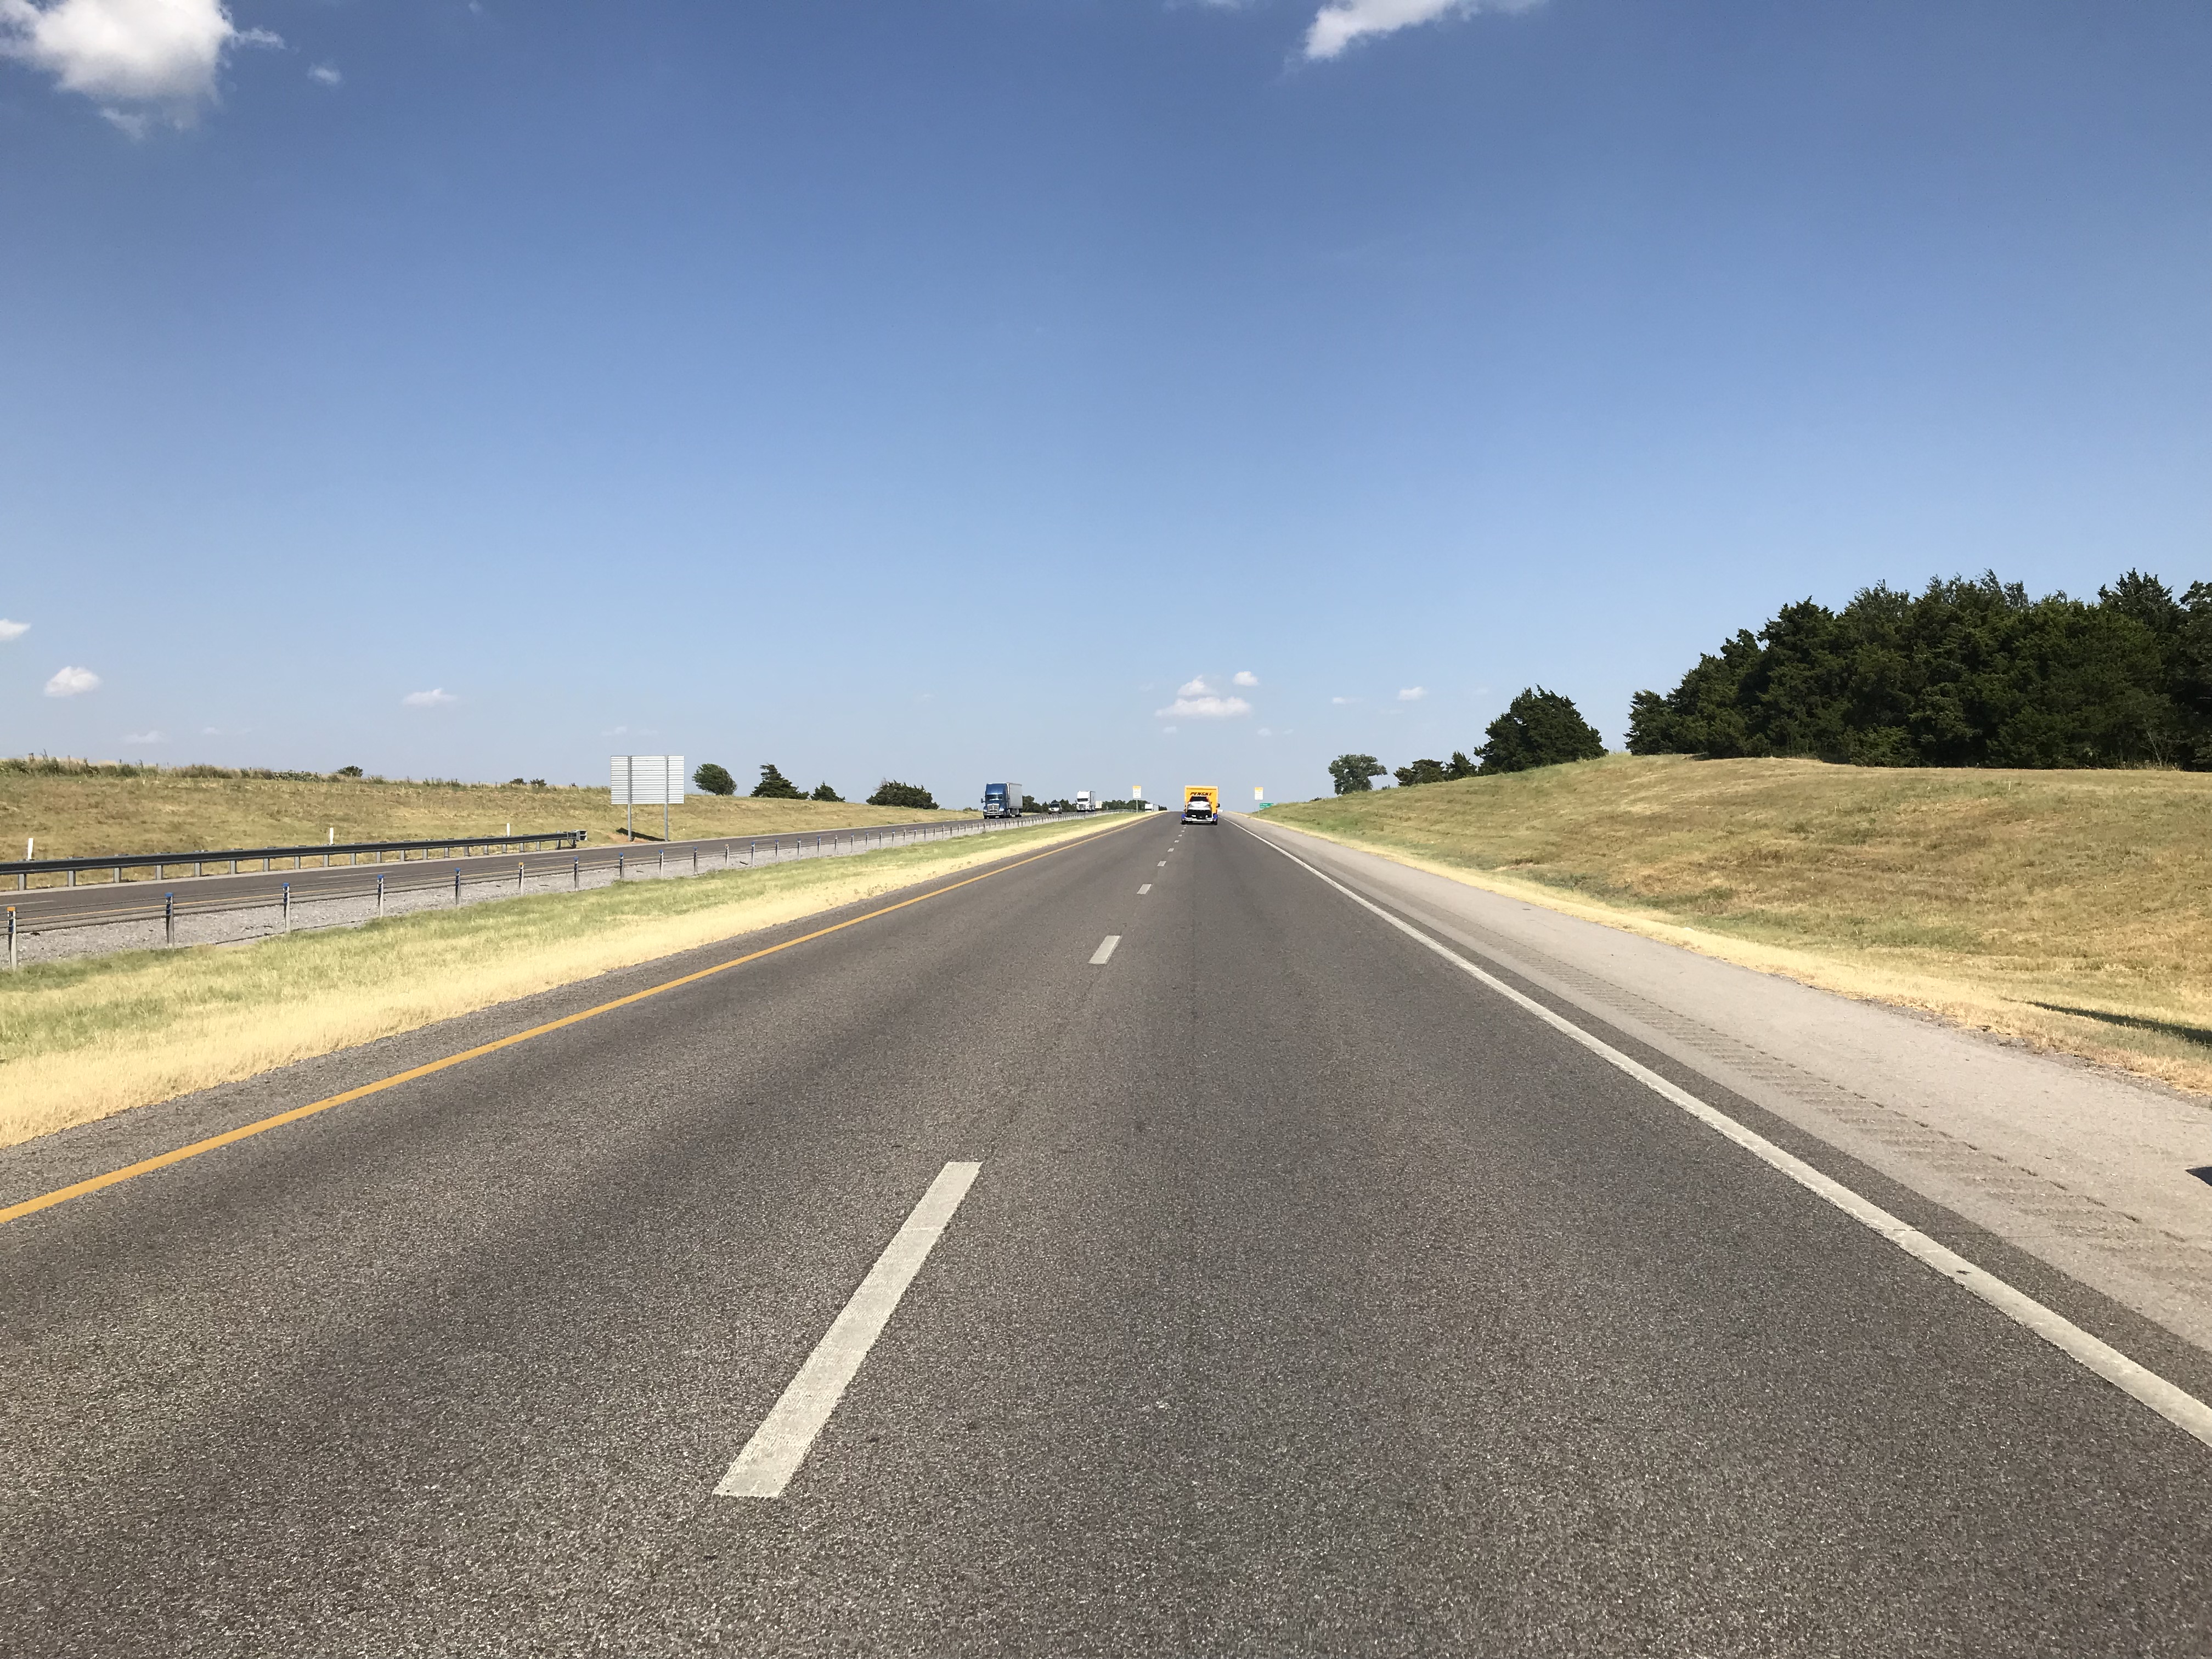 Four lane asphalt highway with traffic in the distance and blue skies.